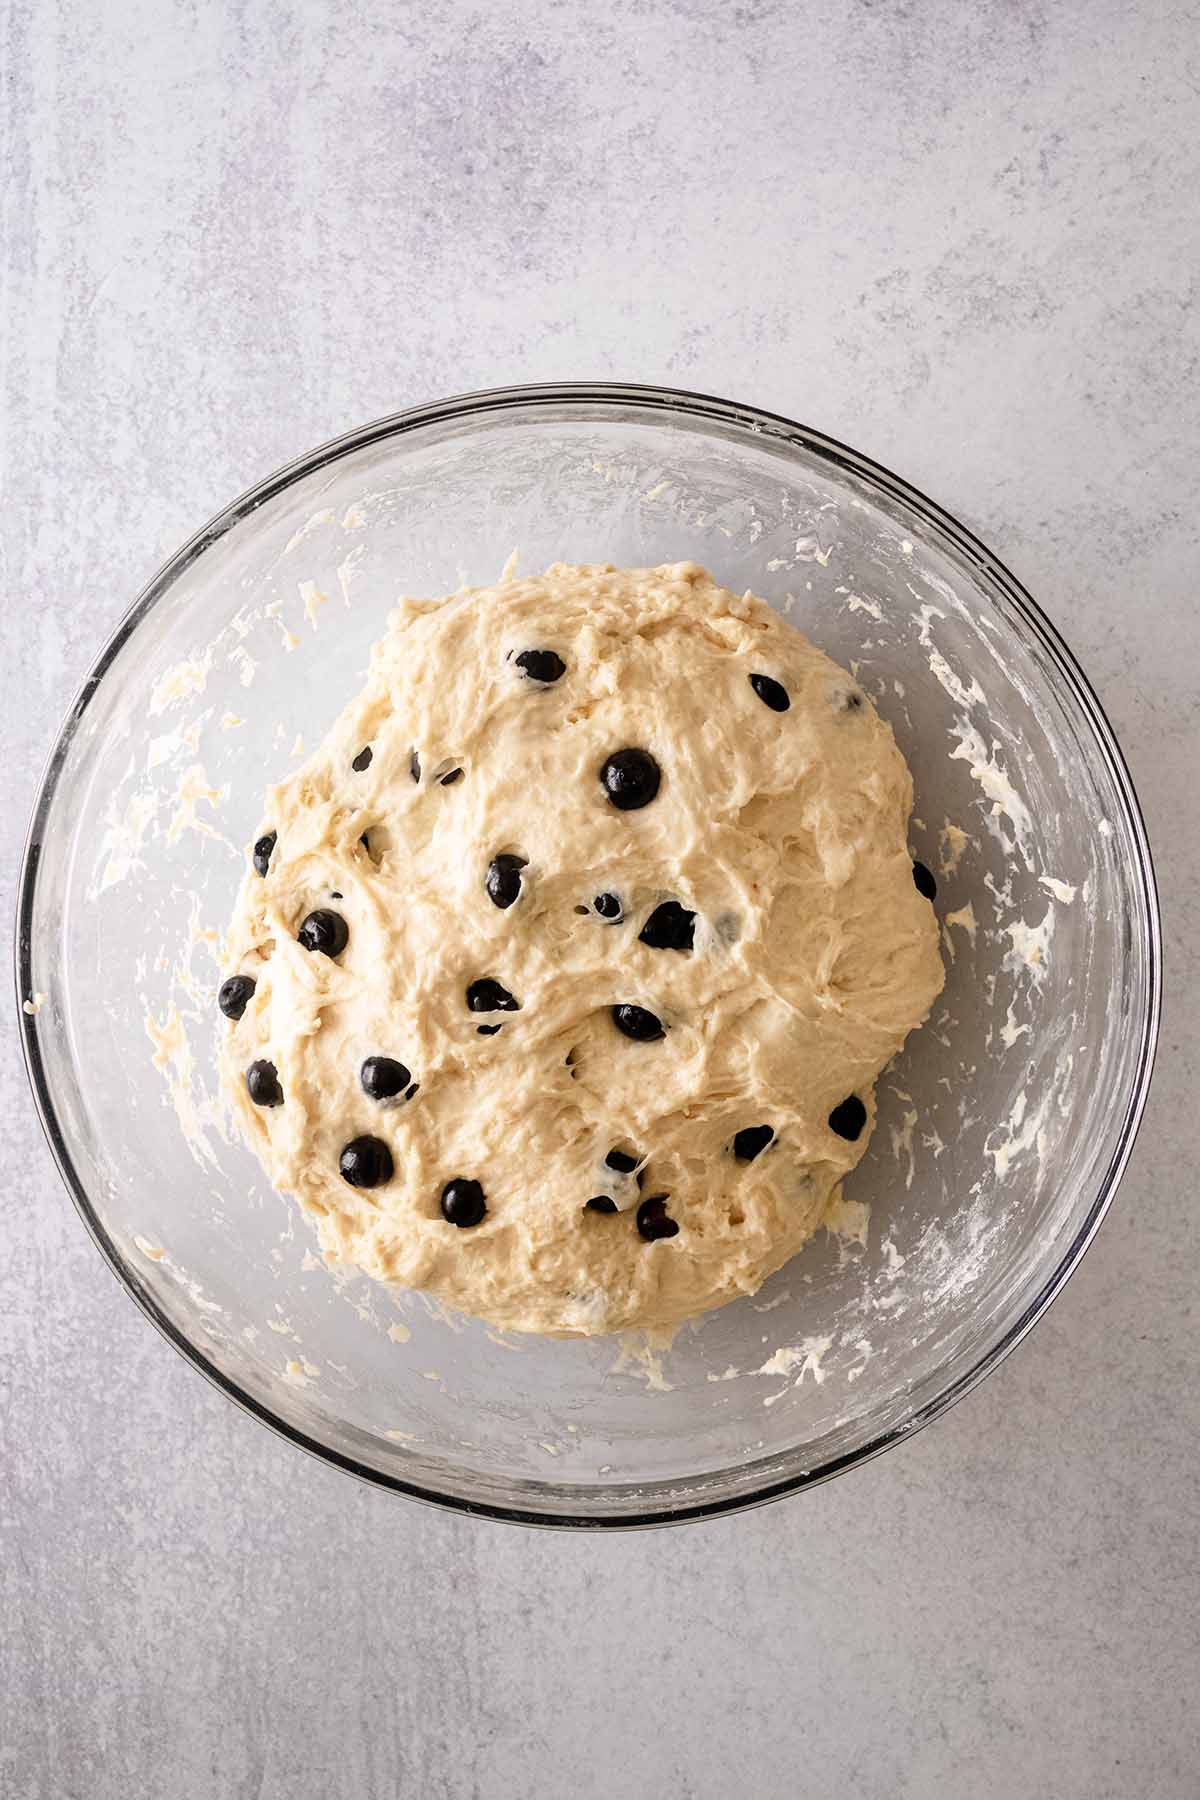 Blueberry English muffin dough in a glass bowl.